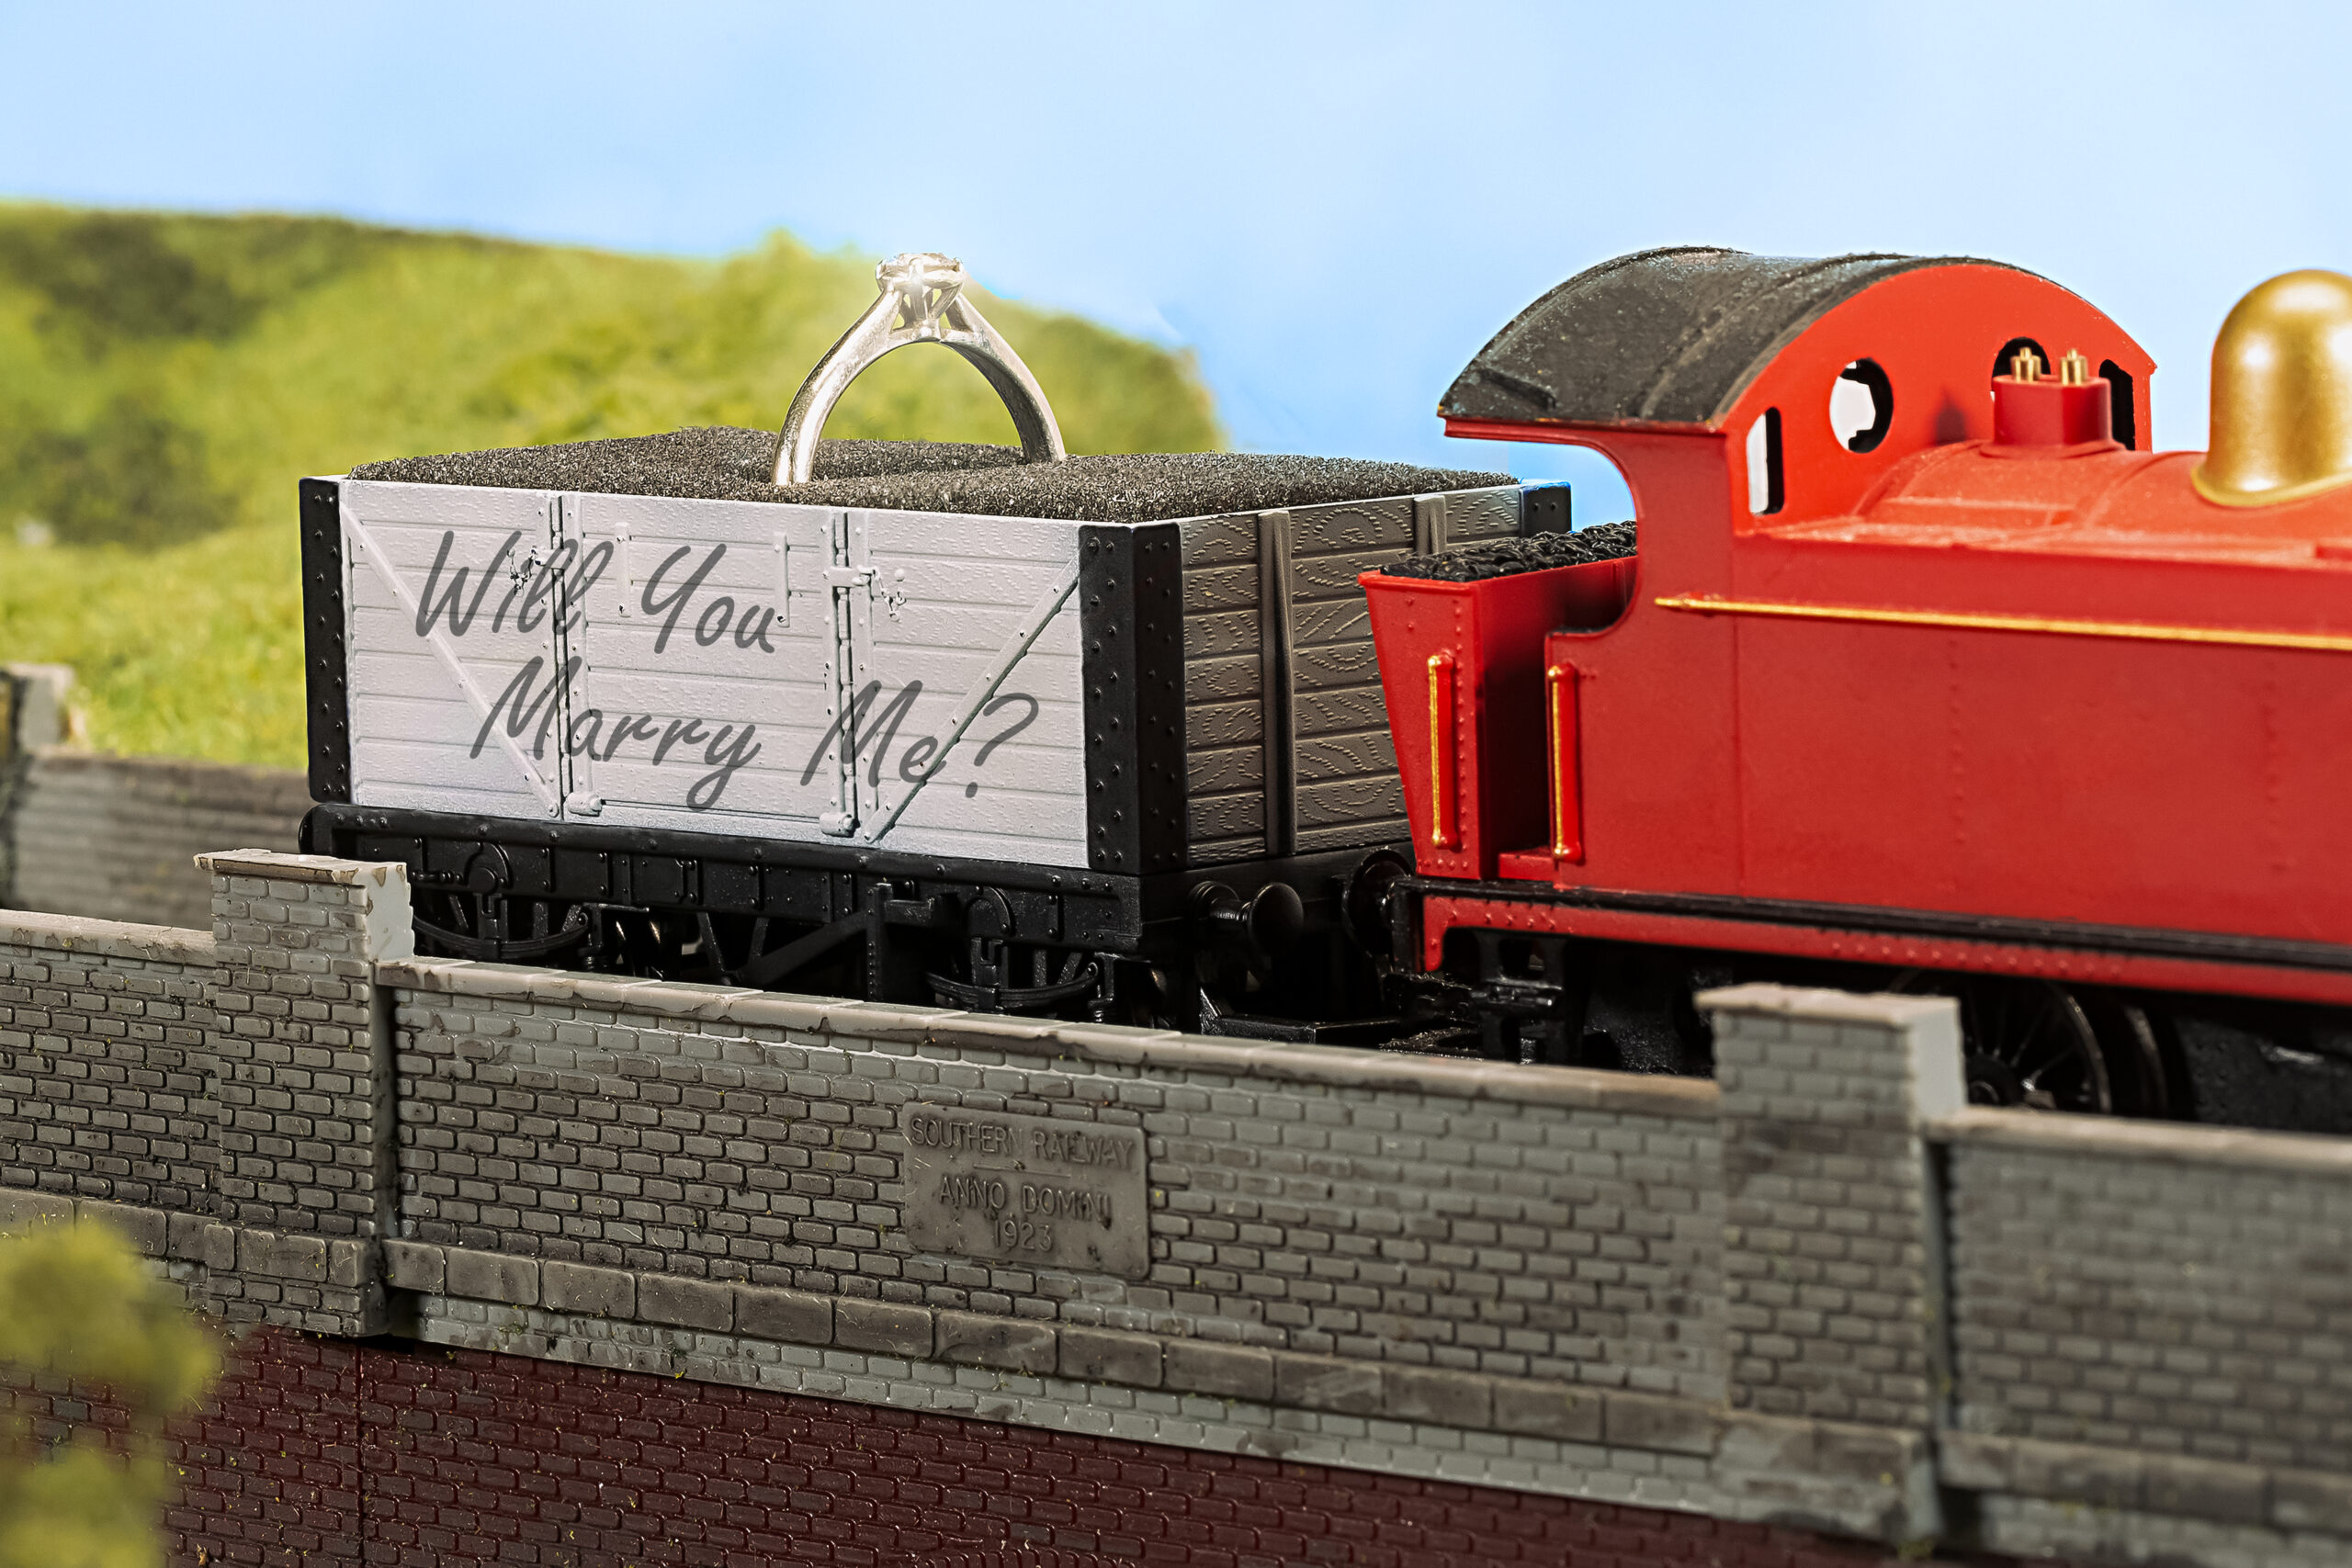 Hornby Hobbies invites lovers to take a leap this year